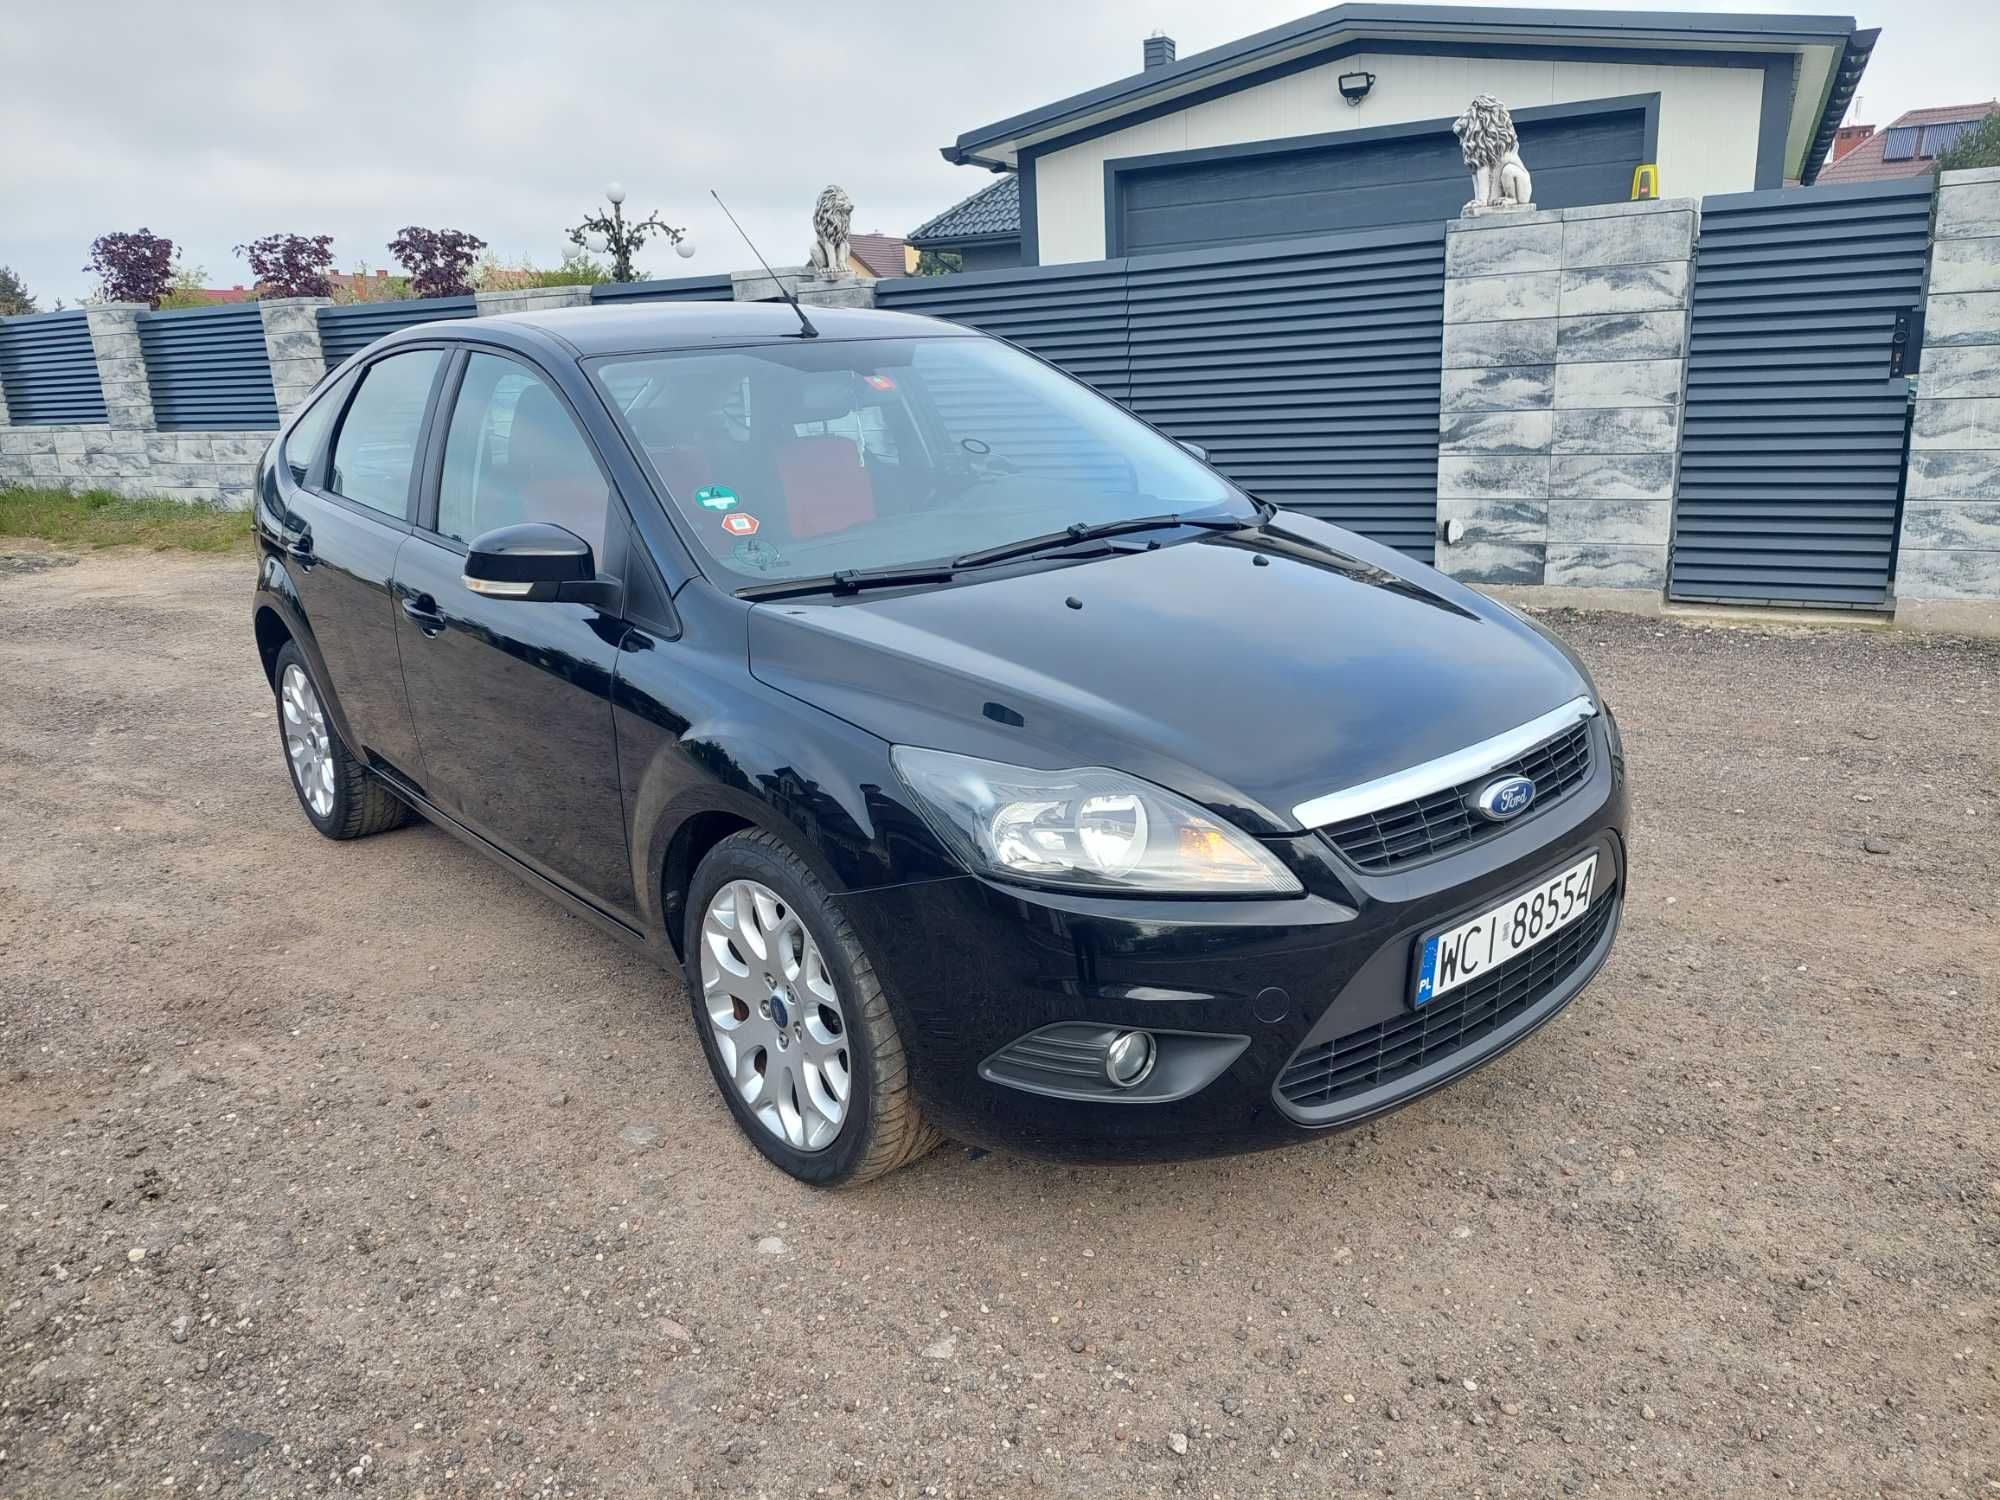 Ford Focus 2008 rok 1.6 Benzyna!!!